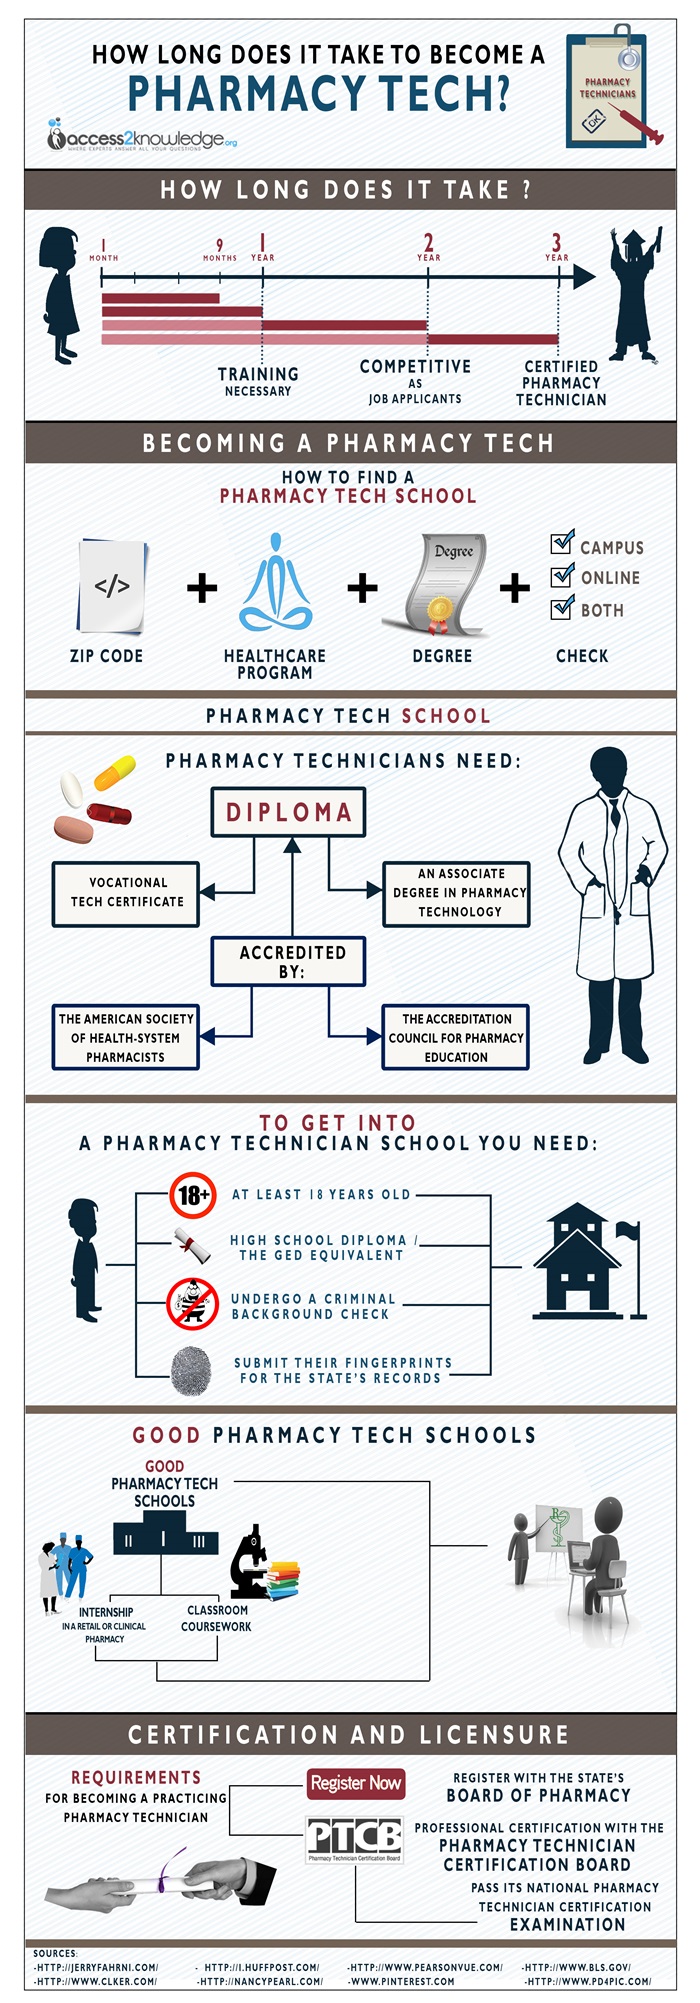 how long does it take to become a pharmacy tech